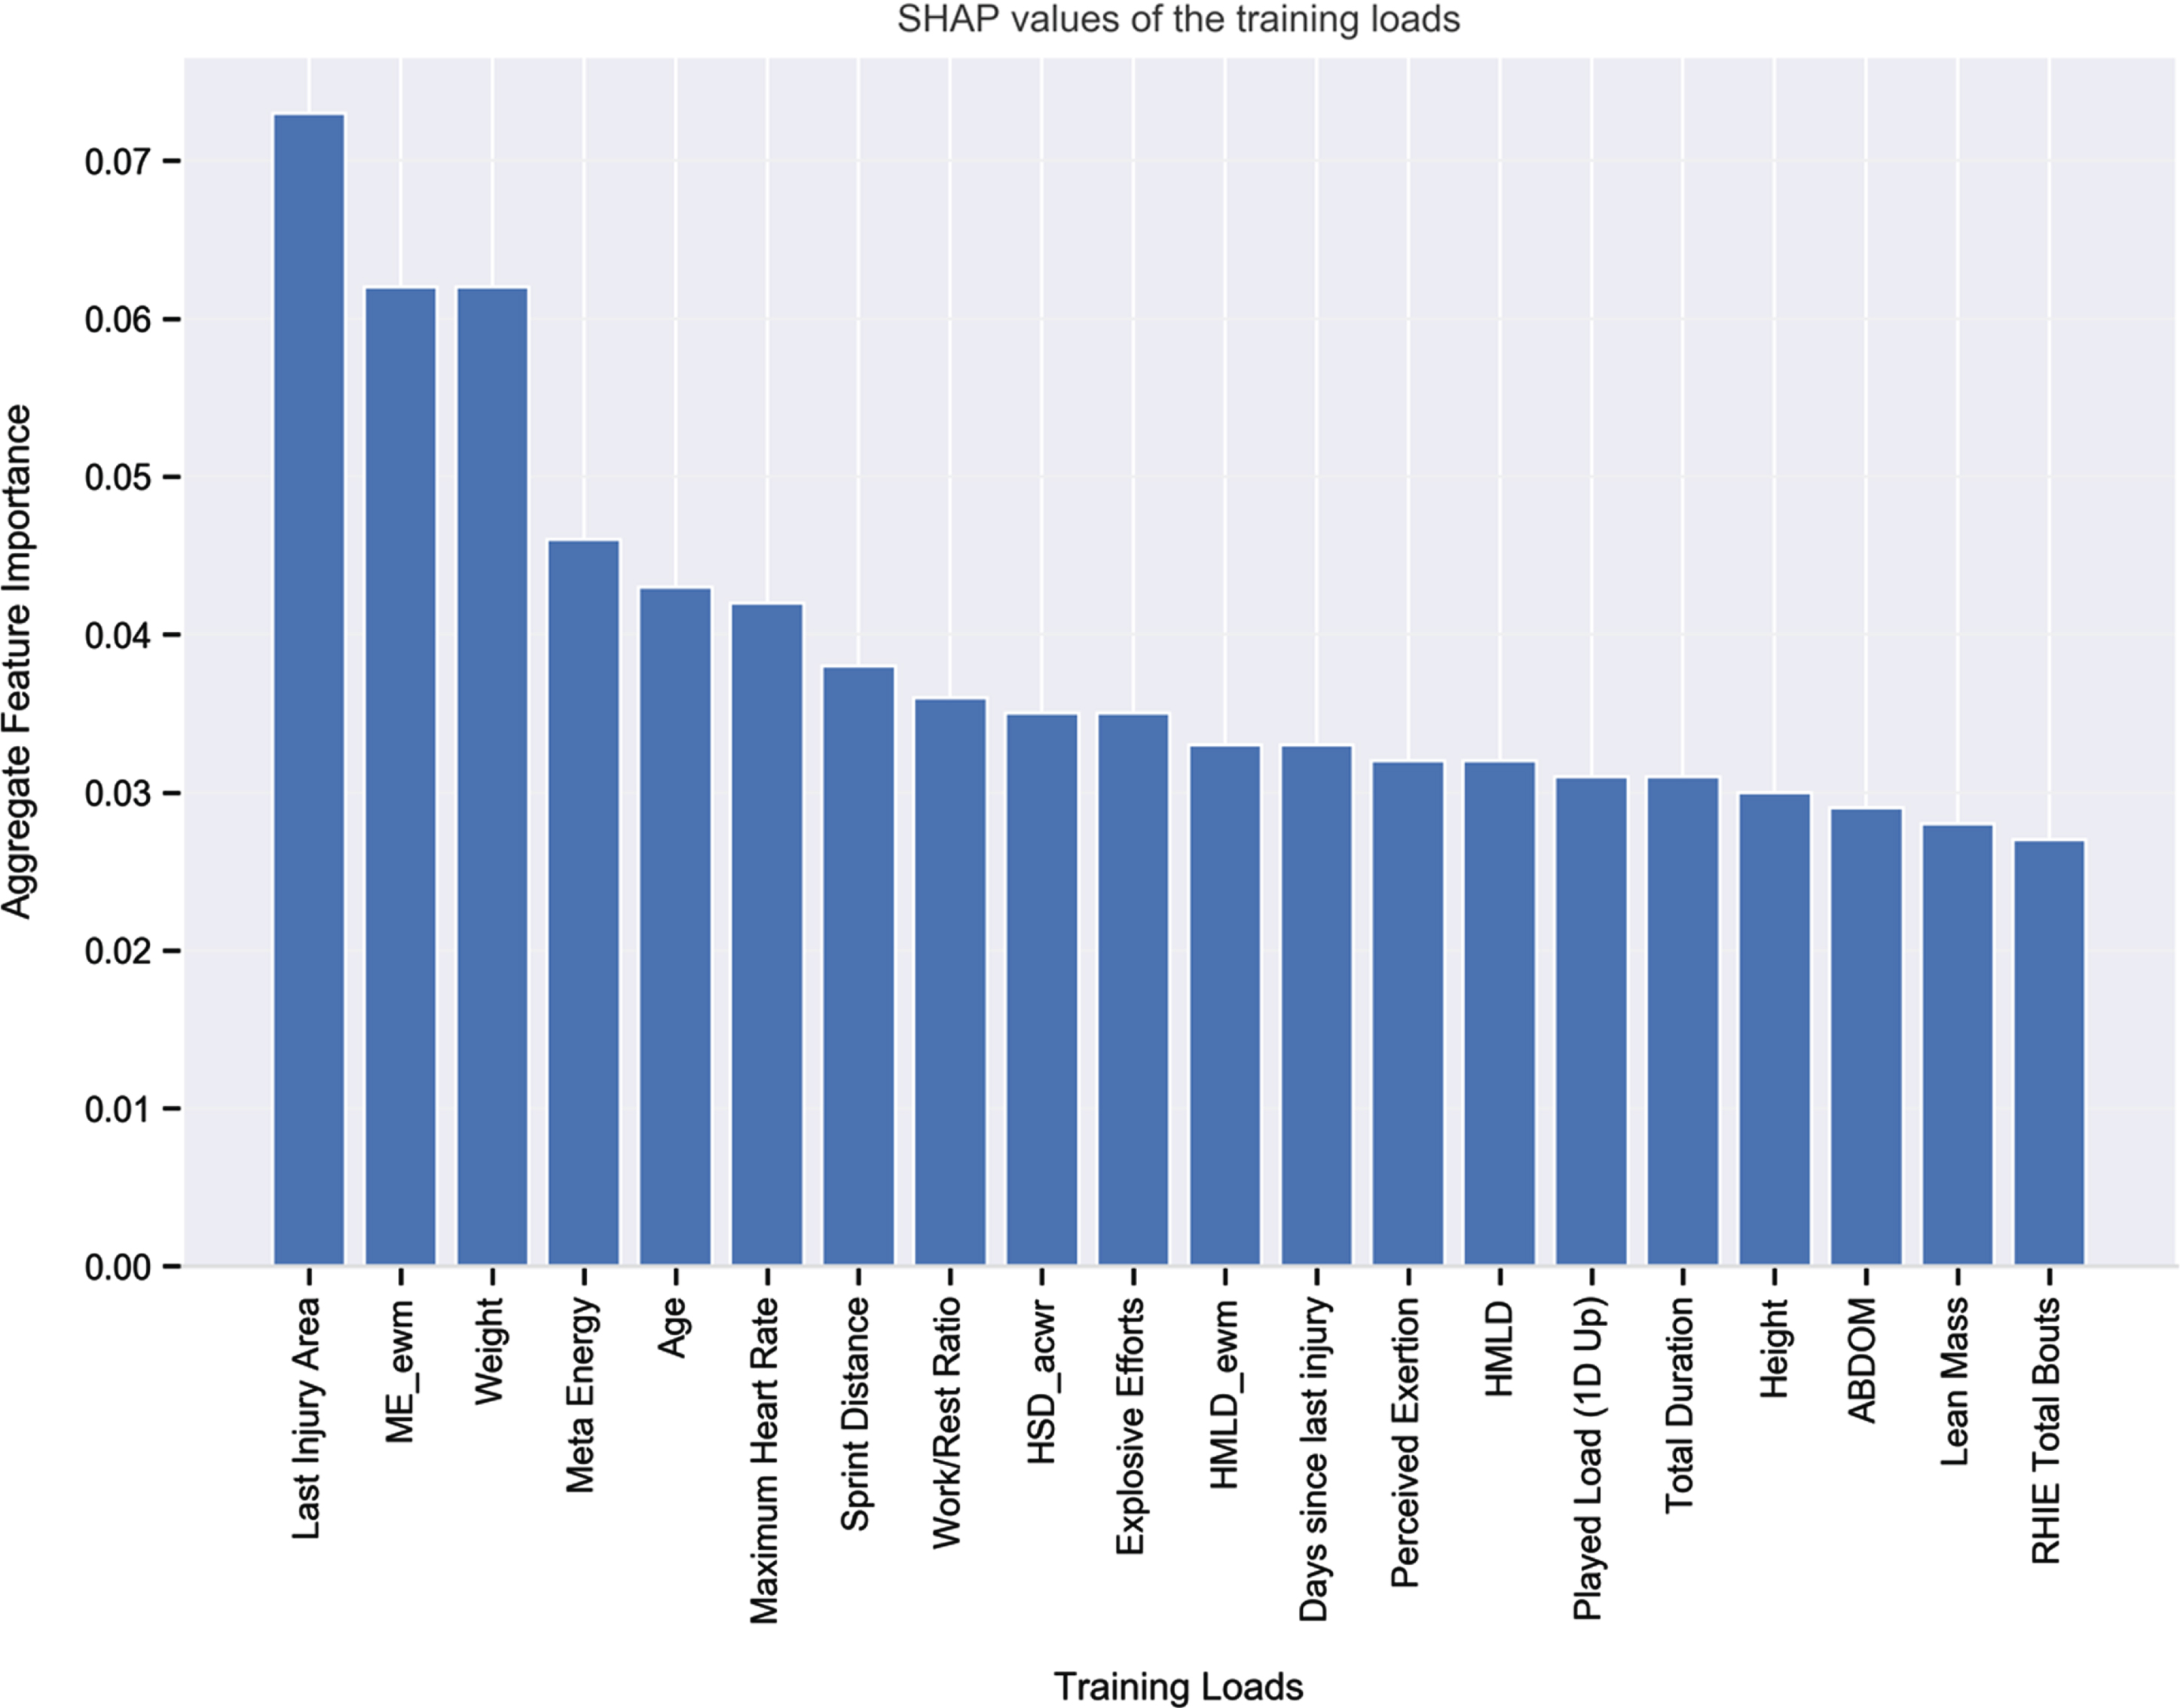 Top 20 Features According to SHAP Values in The Training and Validation Data. Note: The variables in the model are listed from relatively the most important (left) to the least (right) important by their average global impact on the model. Each bar shows the mean absolute SHAP value for each variable, the higher the value, the higher the importance on the classification model (i.e., a higher probability of a positive prediction which is injury). The same applies for the Figs. 4, 5 and 6 as well.